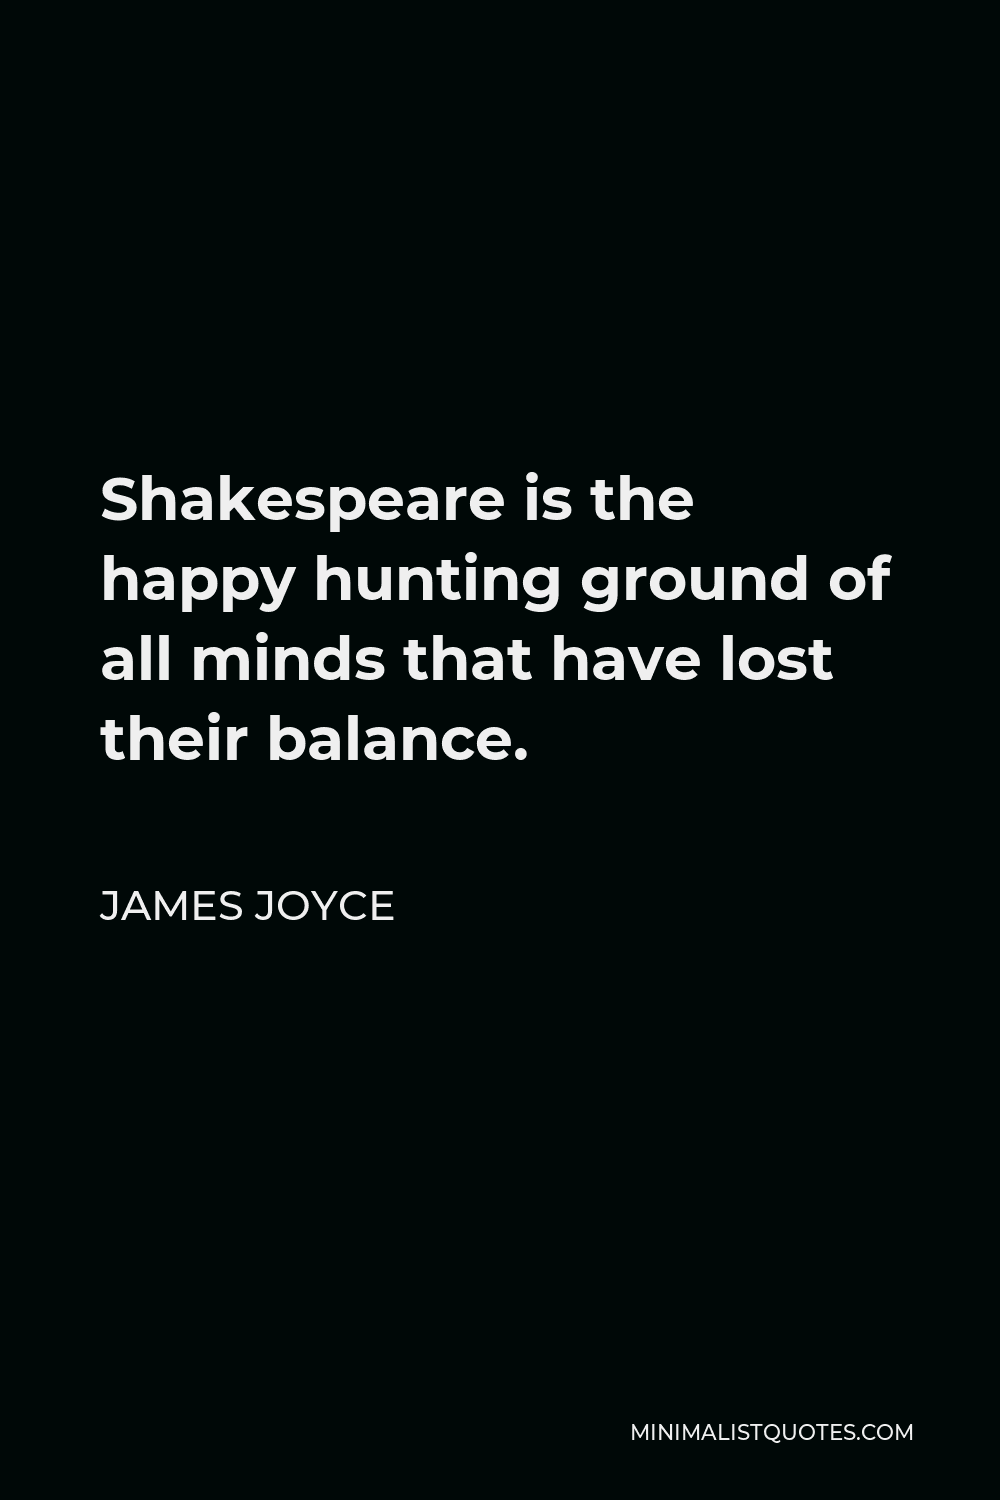 James Joyce Quote - Shakespeare is the happy hunting ground of all minds that have lost their balance.